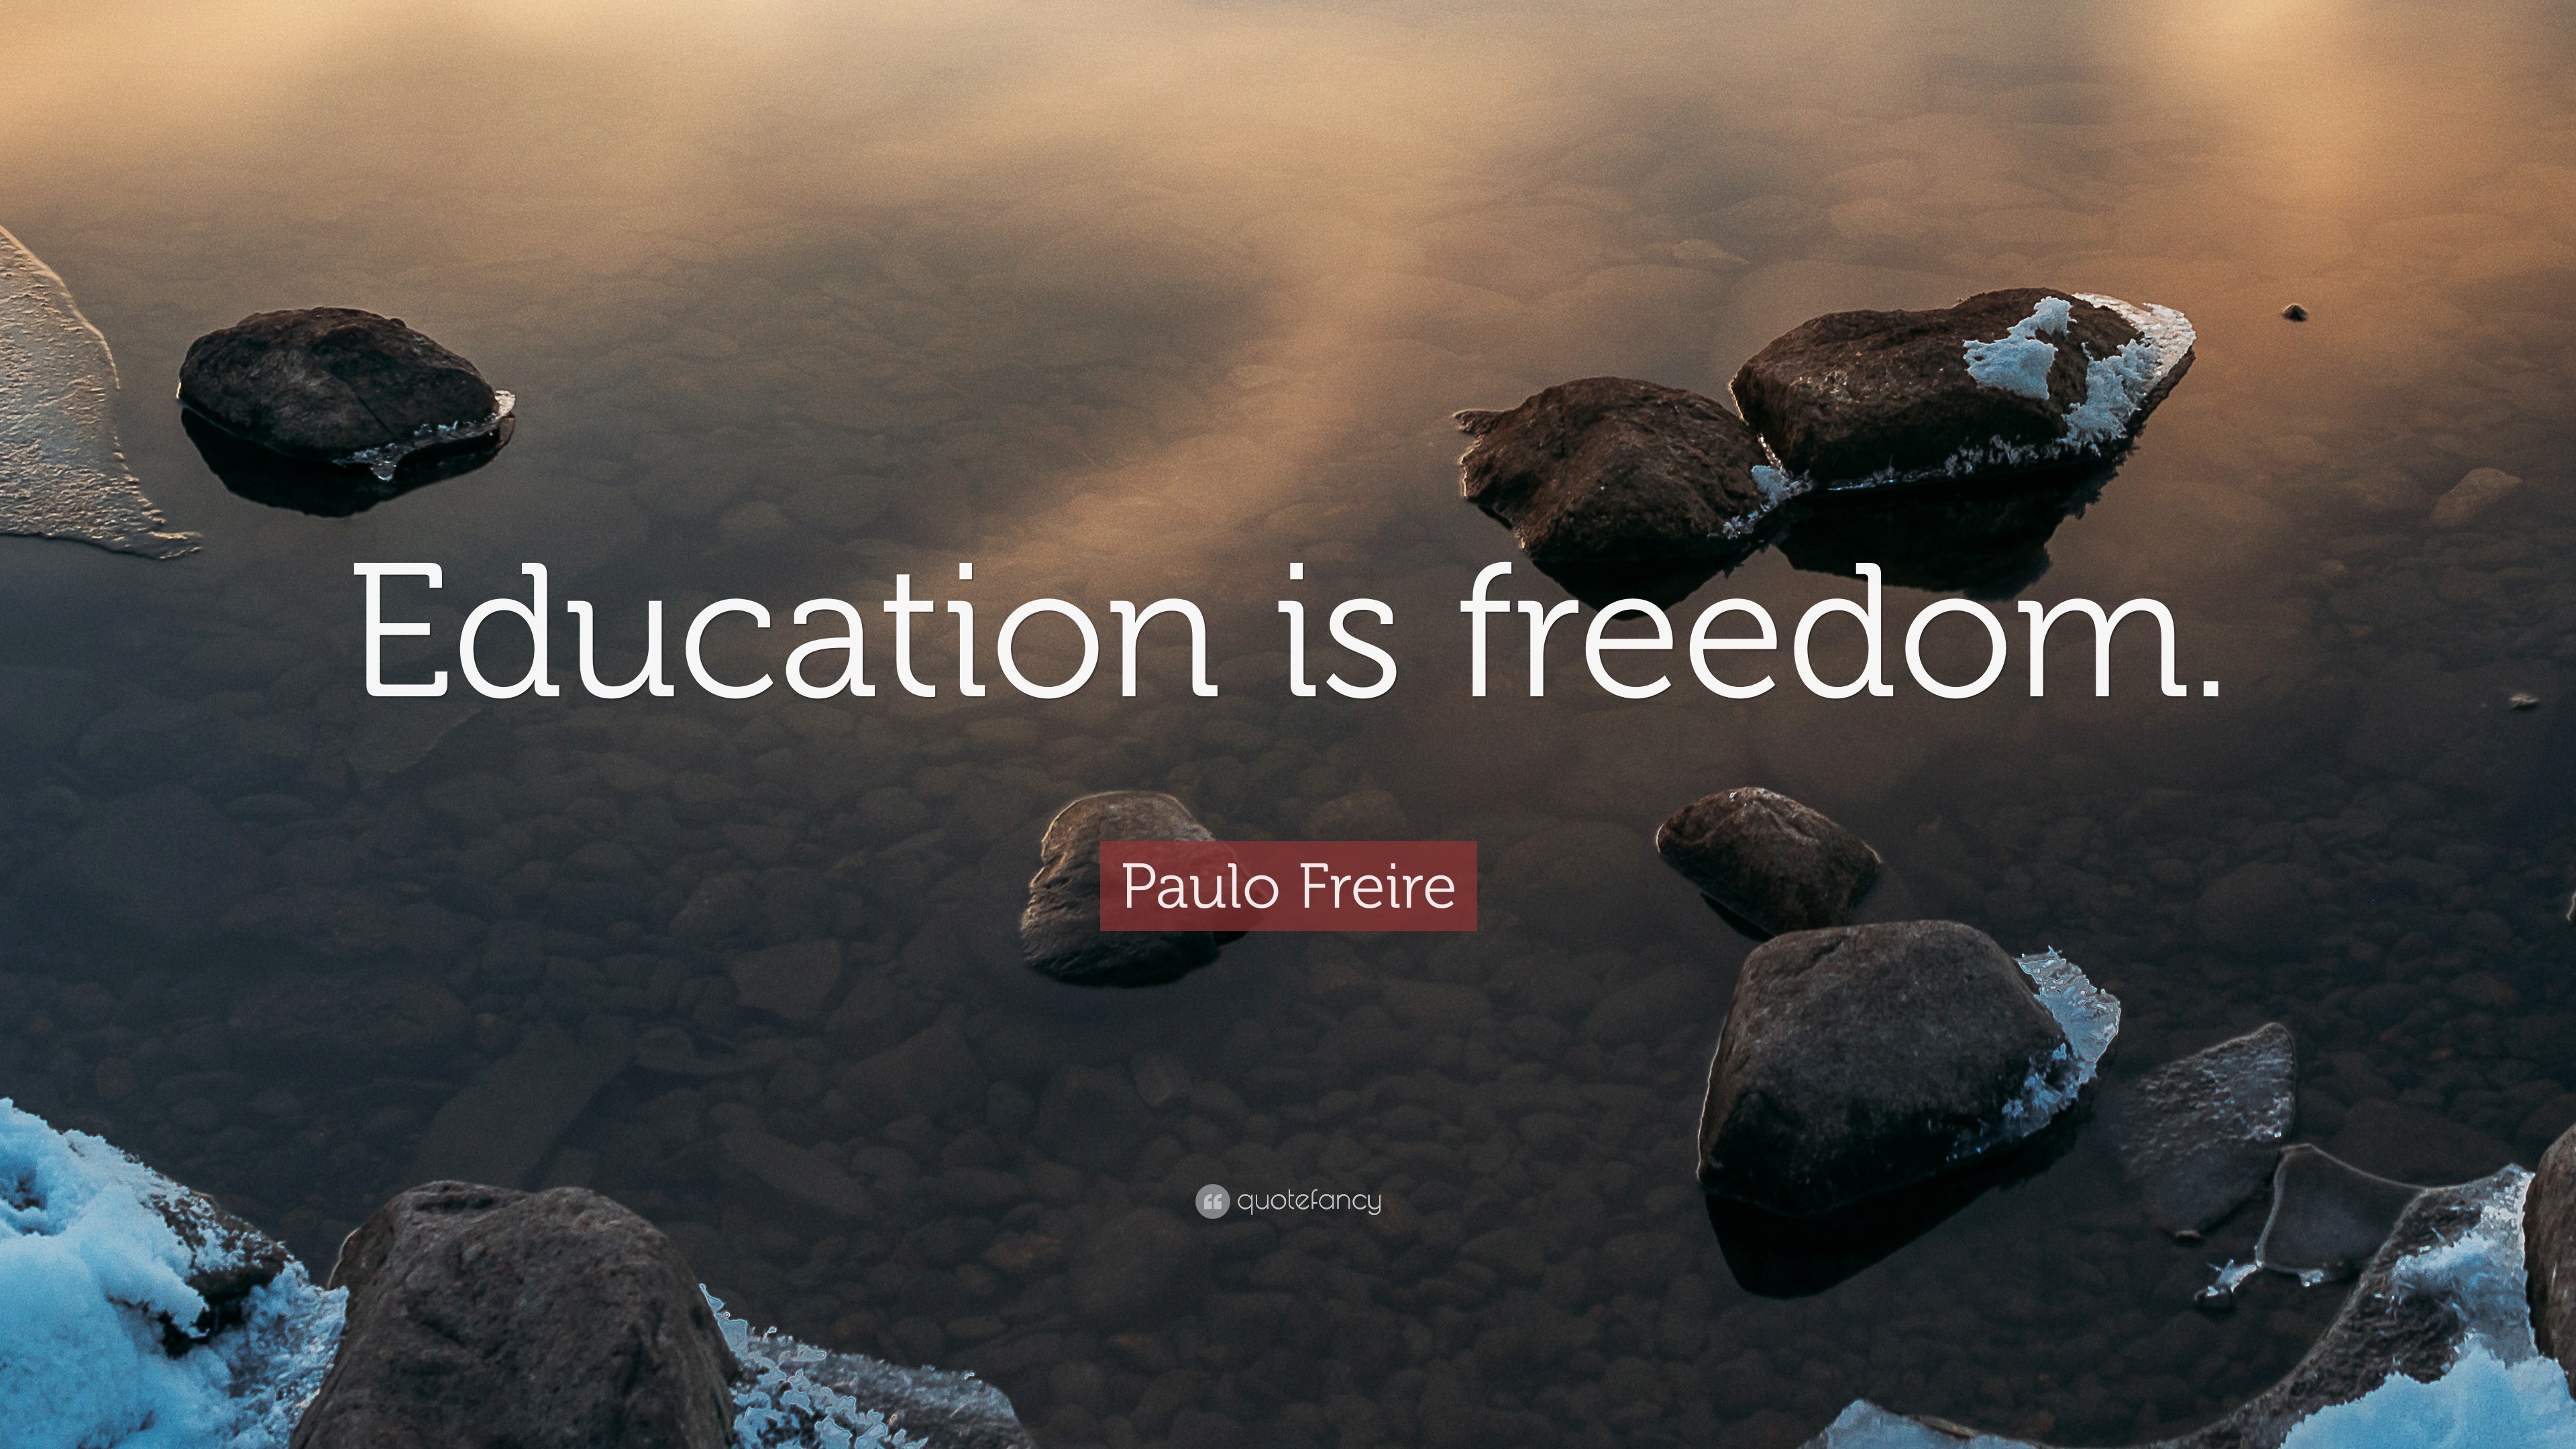 Paulo Freire Quote: “Education is freedom.” (12 wallpapers) - Quotefancy